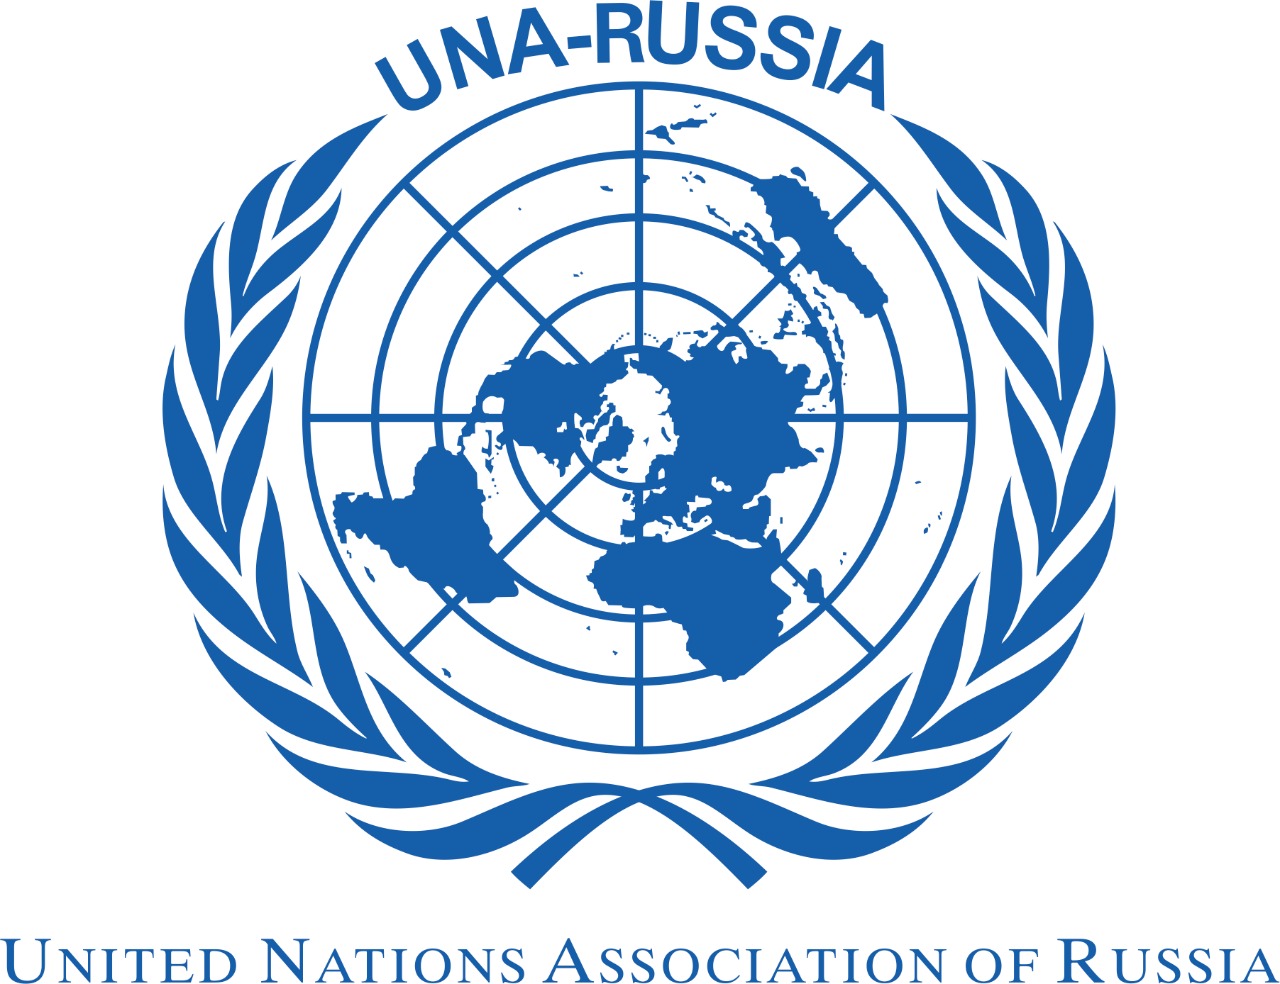 United Nations Association of Russia